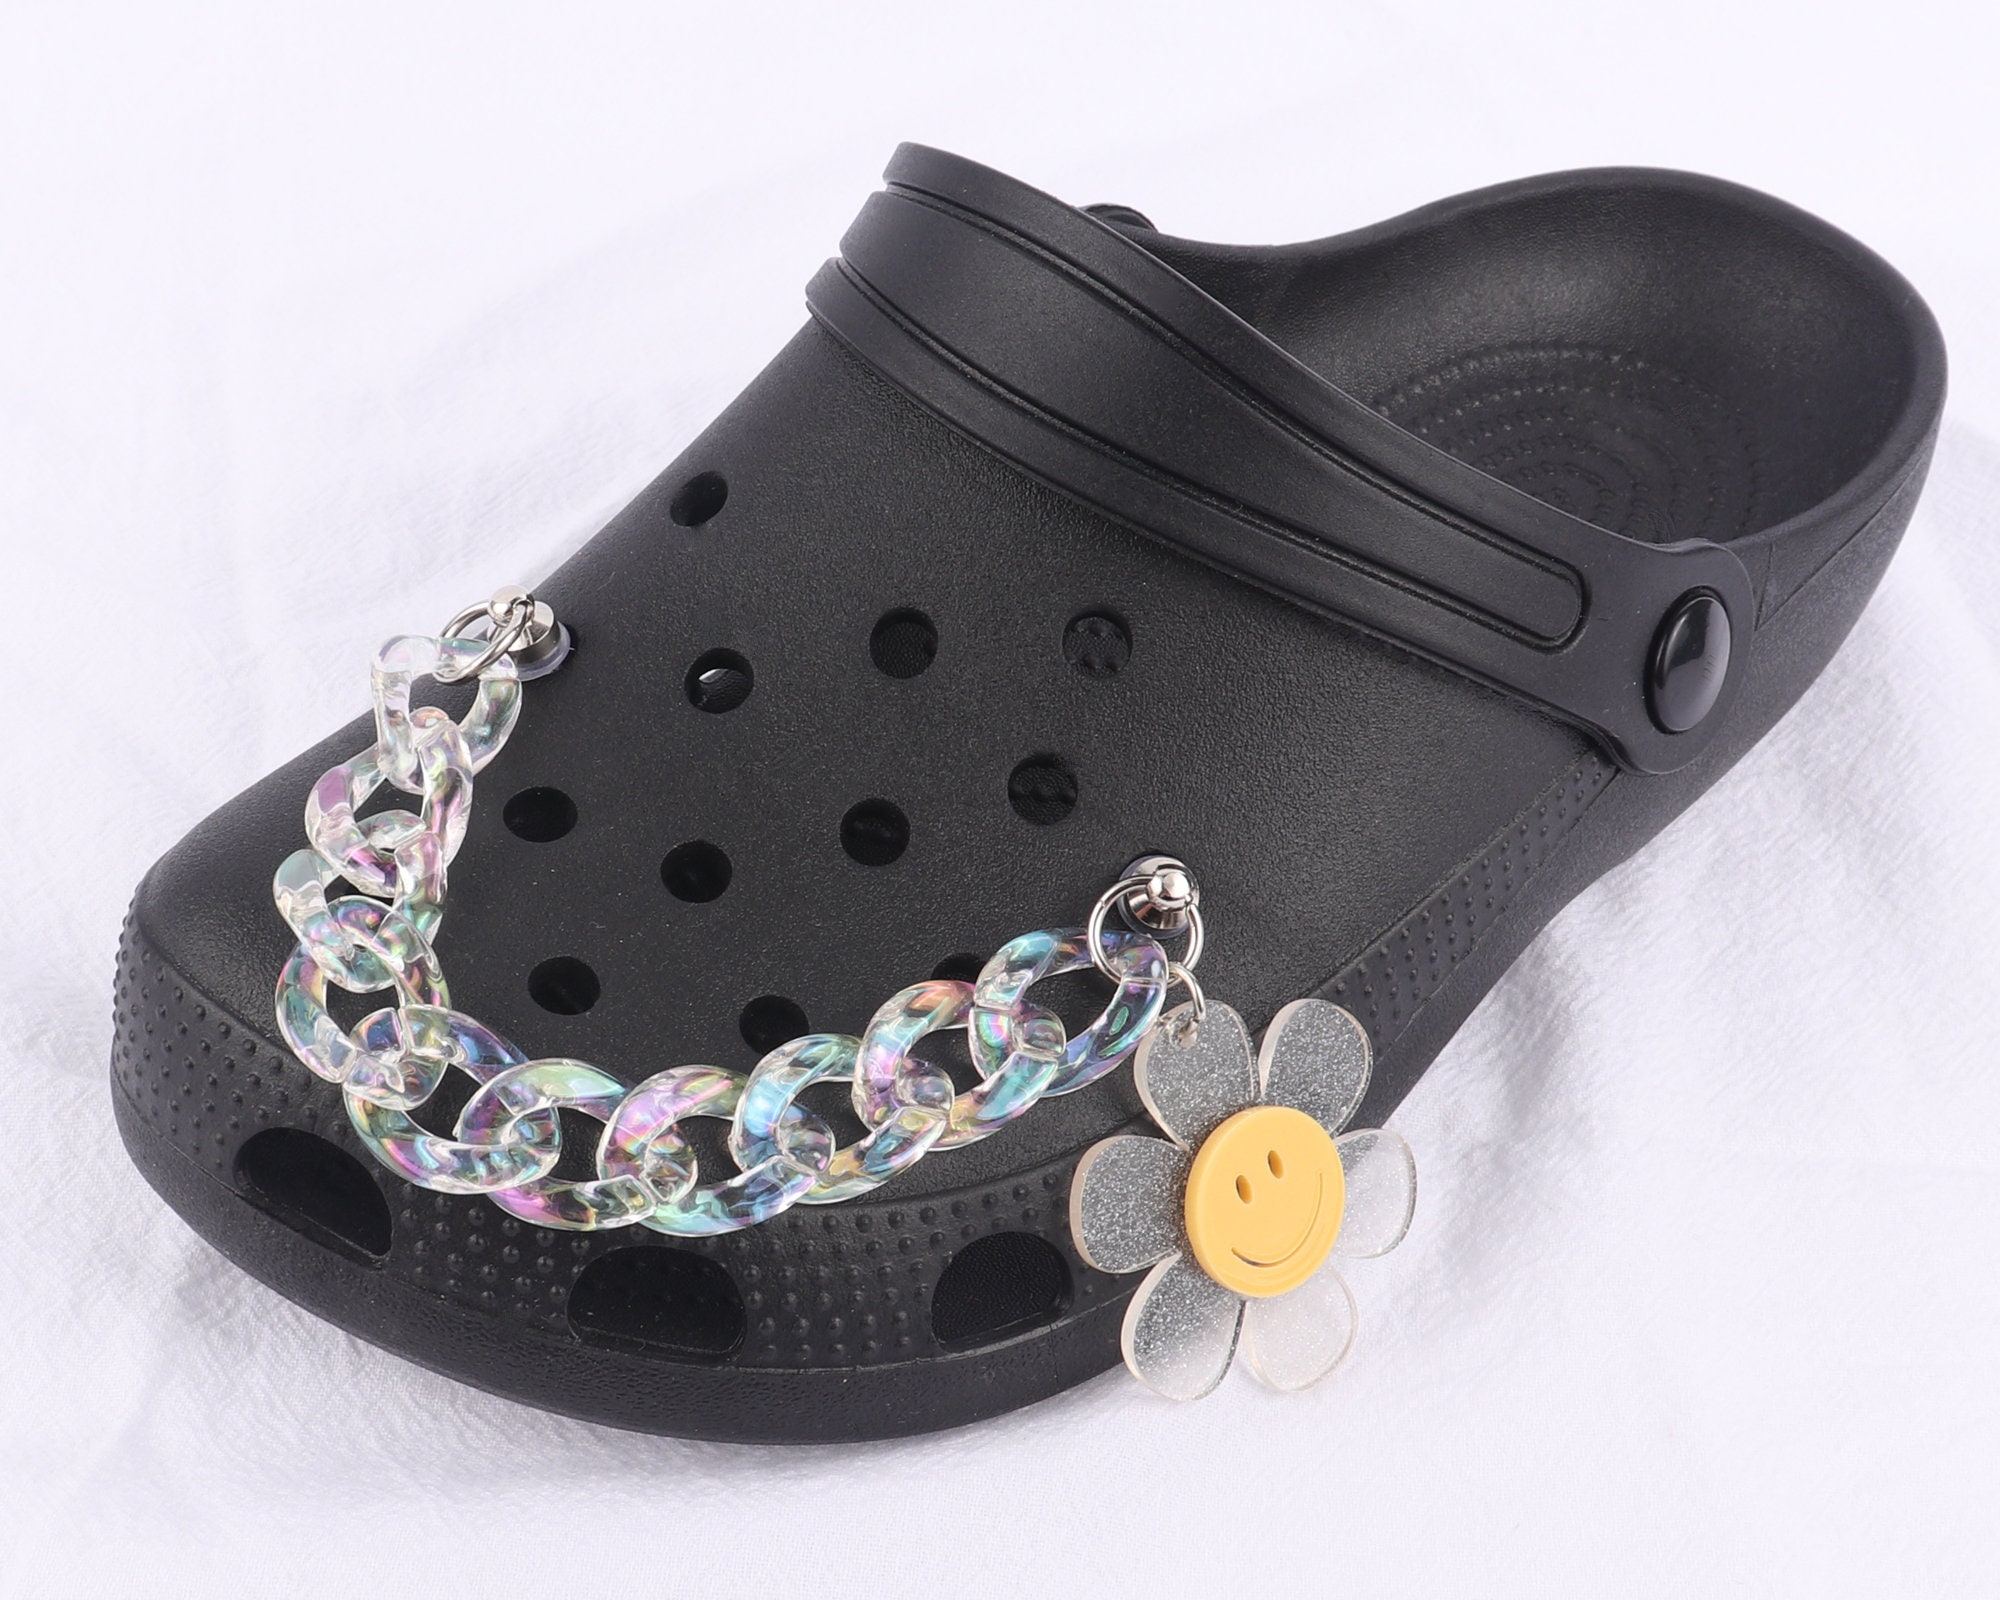 Crocs Chain Charms. Met Color Design Chain Charms for Crocs. 